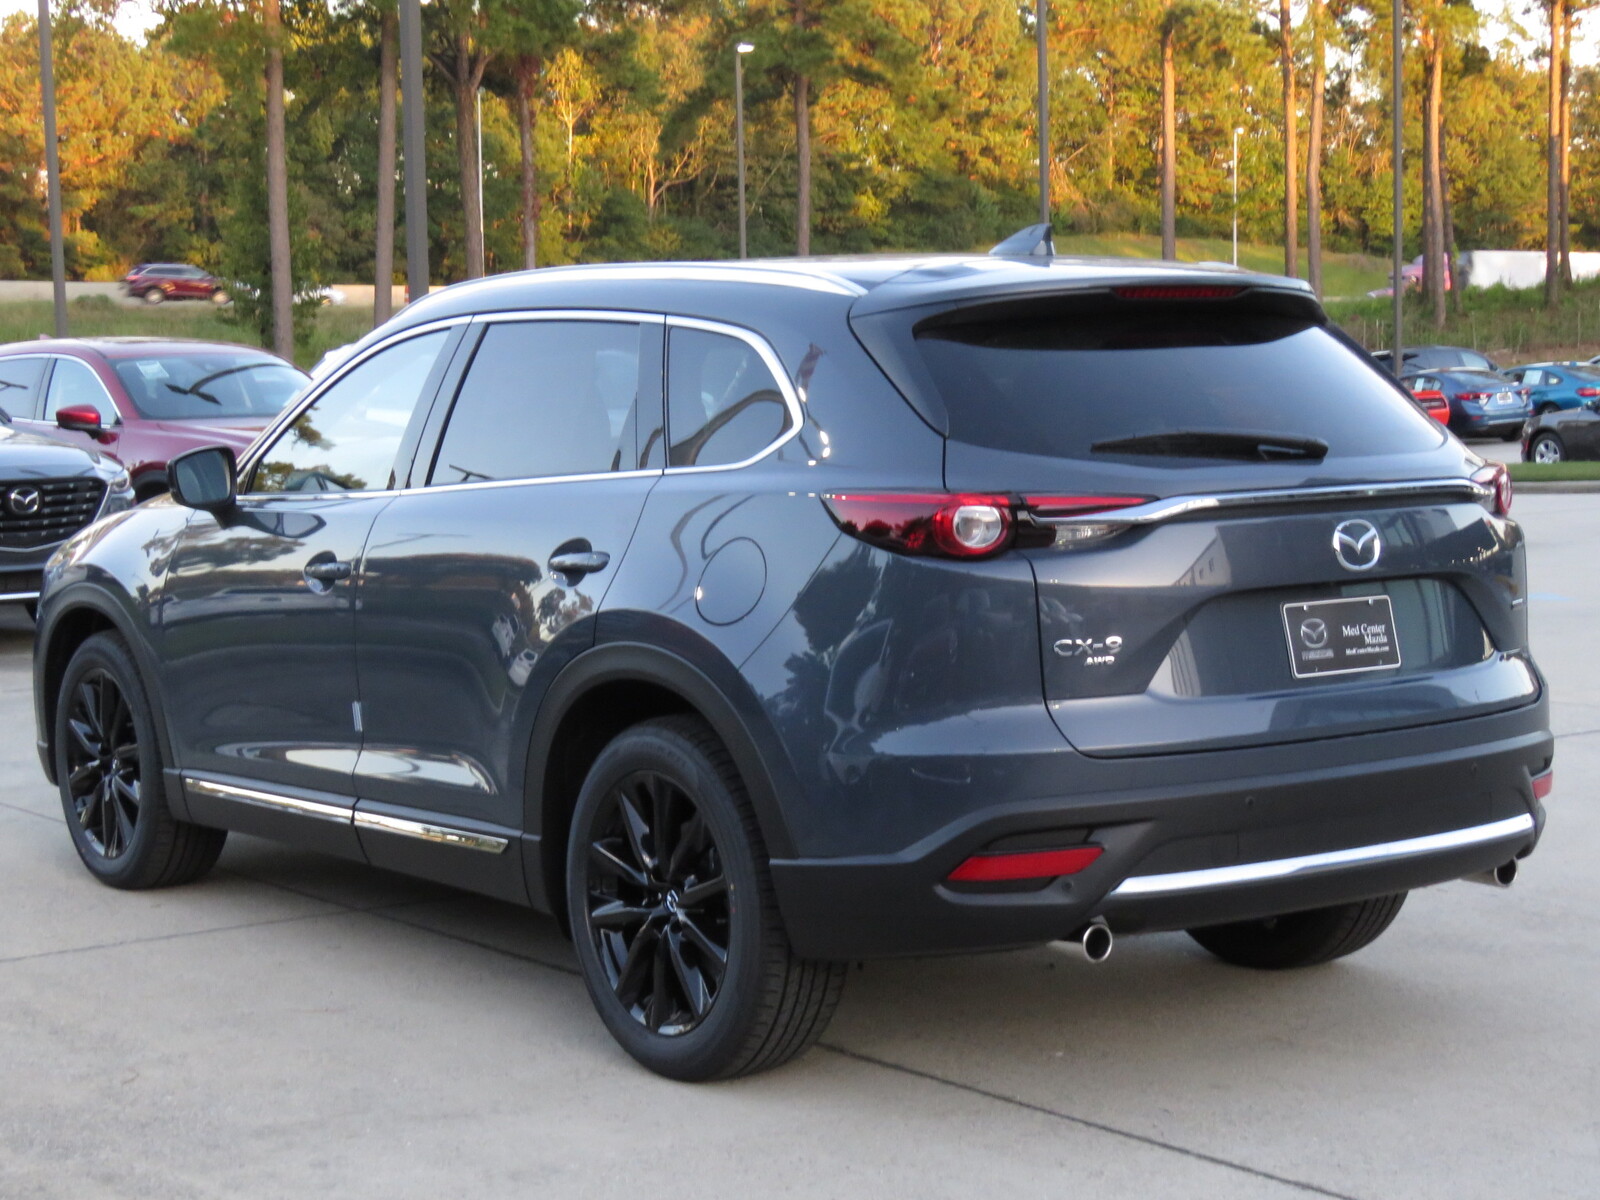 New 2021 MAZDA CX-9 Carbon Edition AWD SUV in Pelham #M16023 | Med